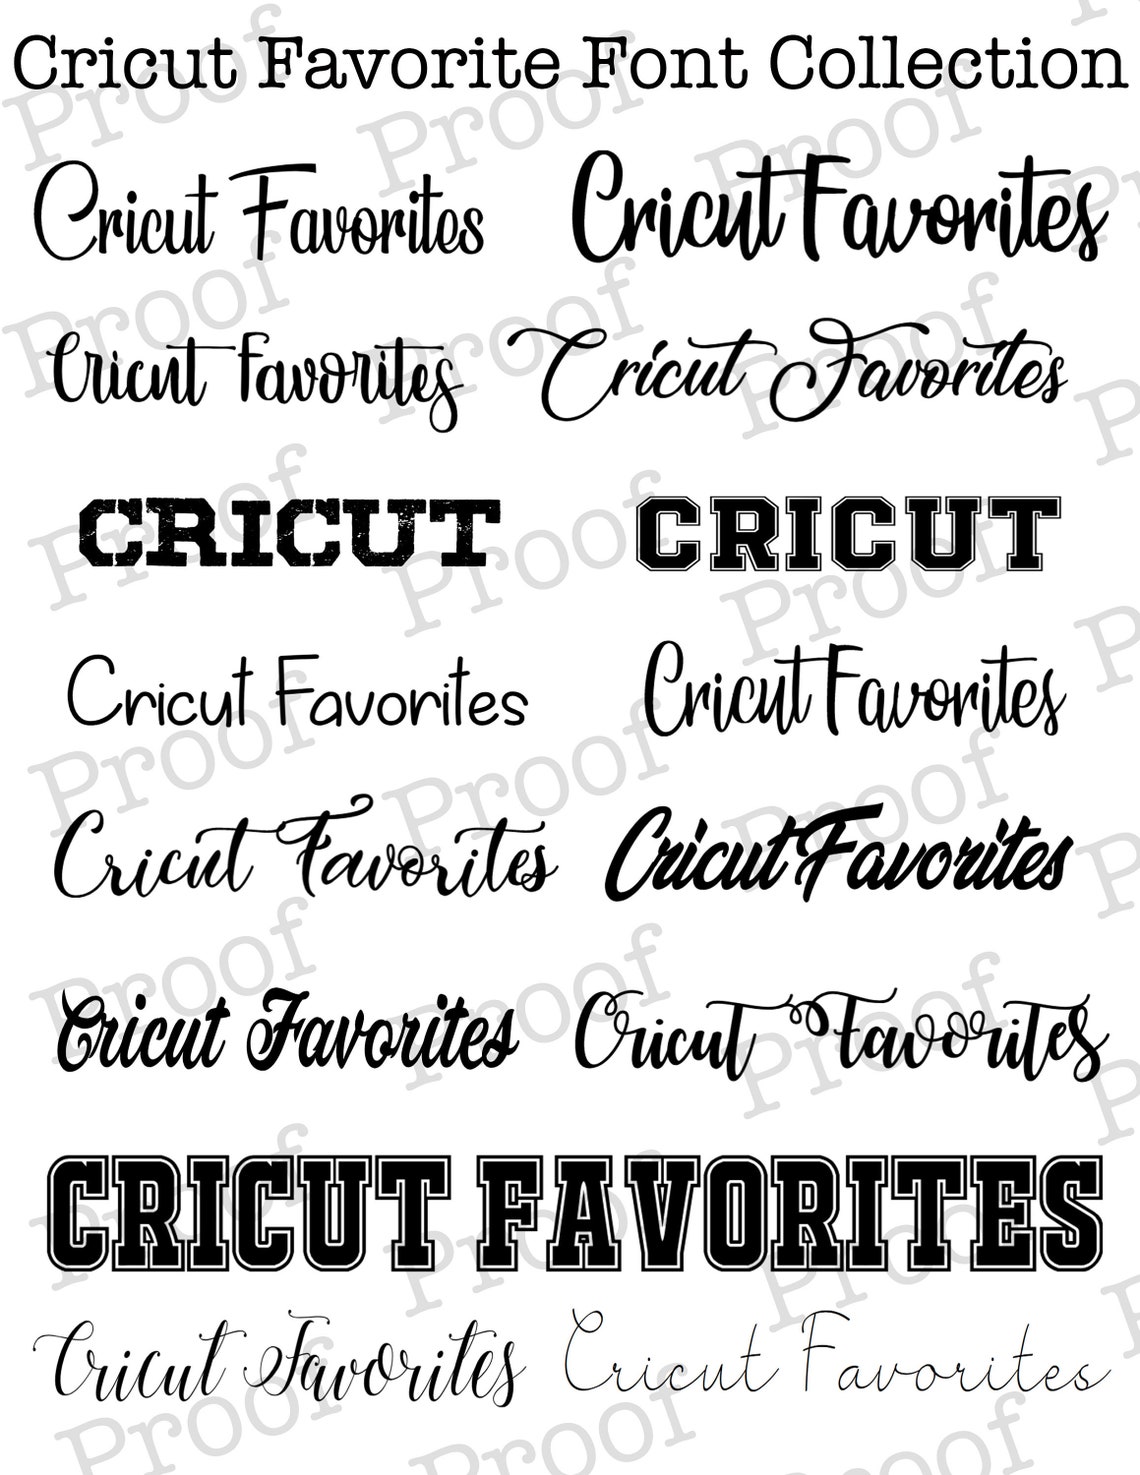 Cricut Favorite Font Collection Great for Use With Cricut - Etsy